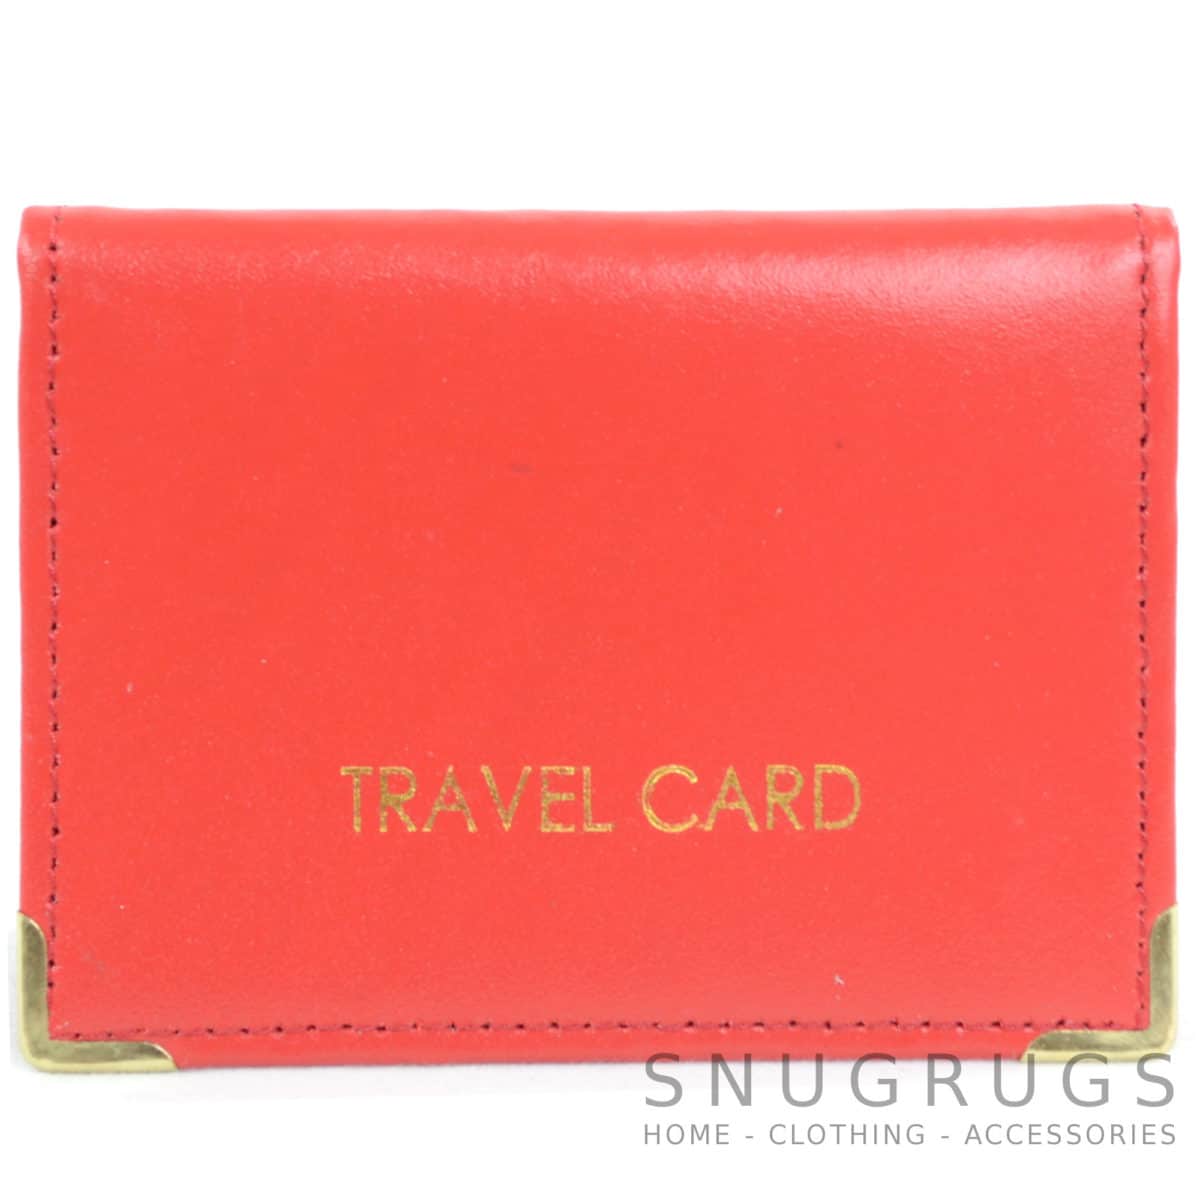 Leather Travel Card / ID / Credit Card Holder - Red